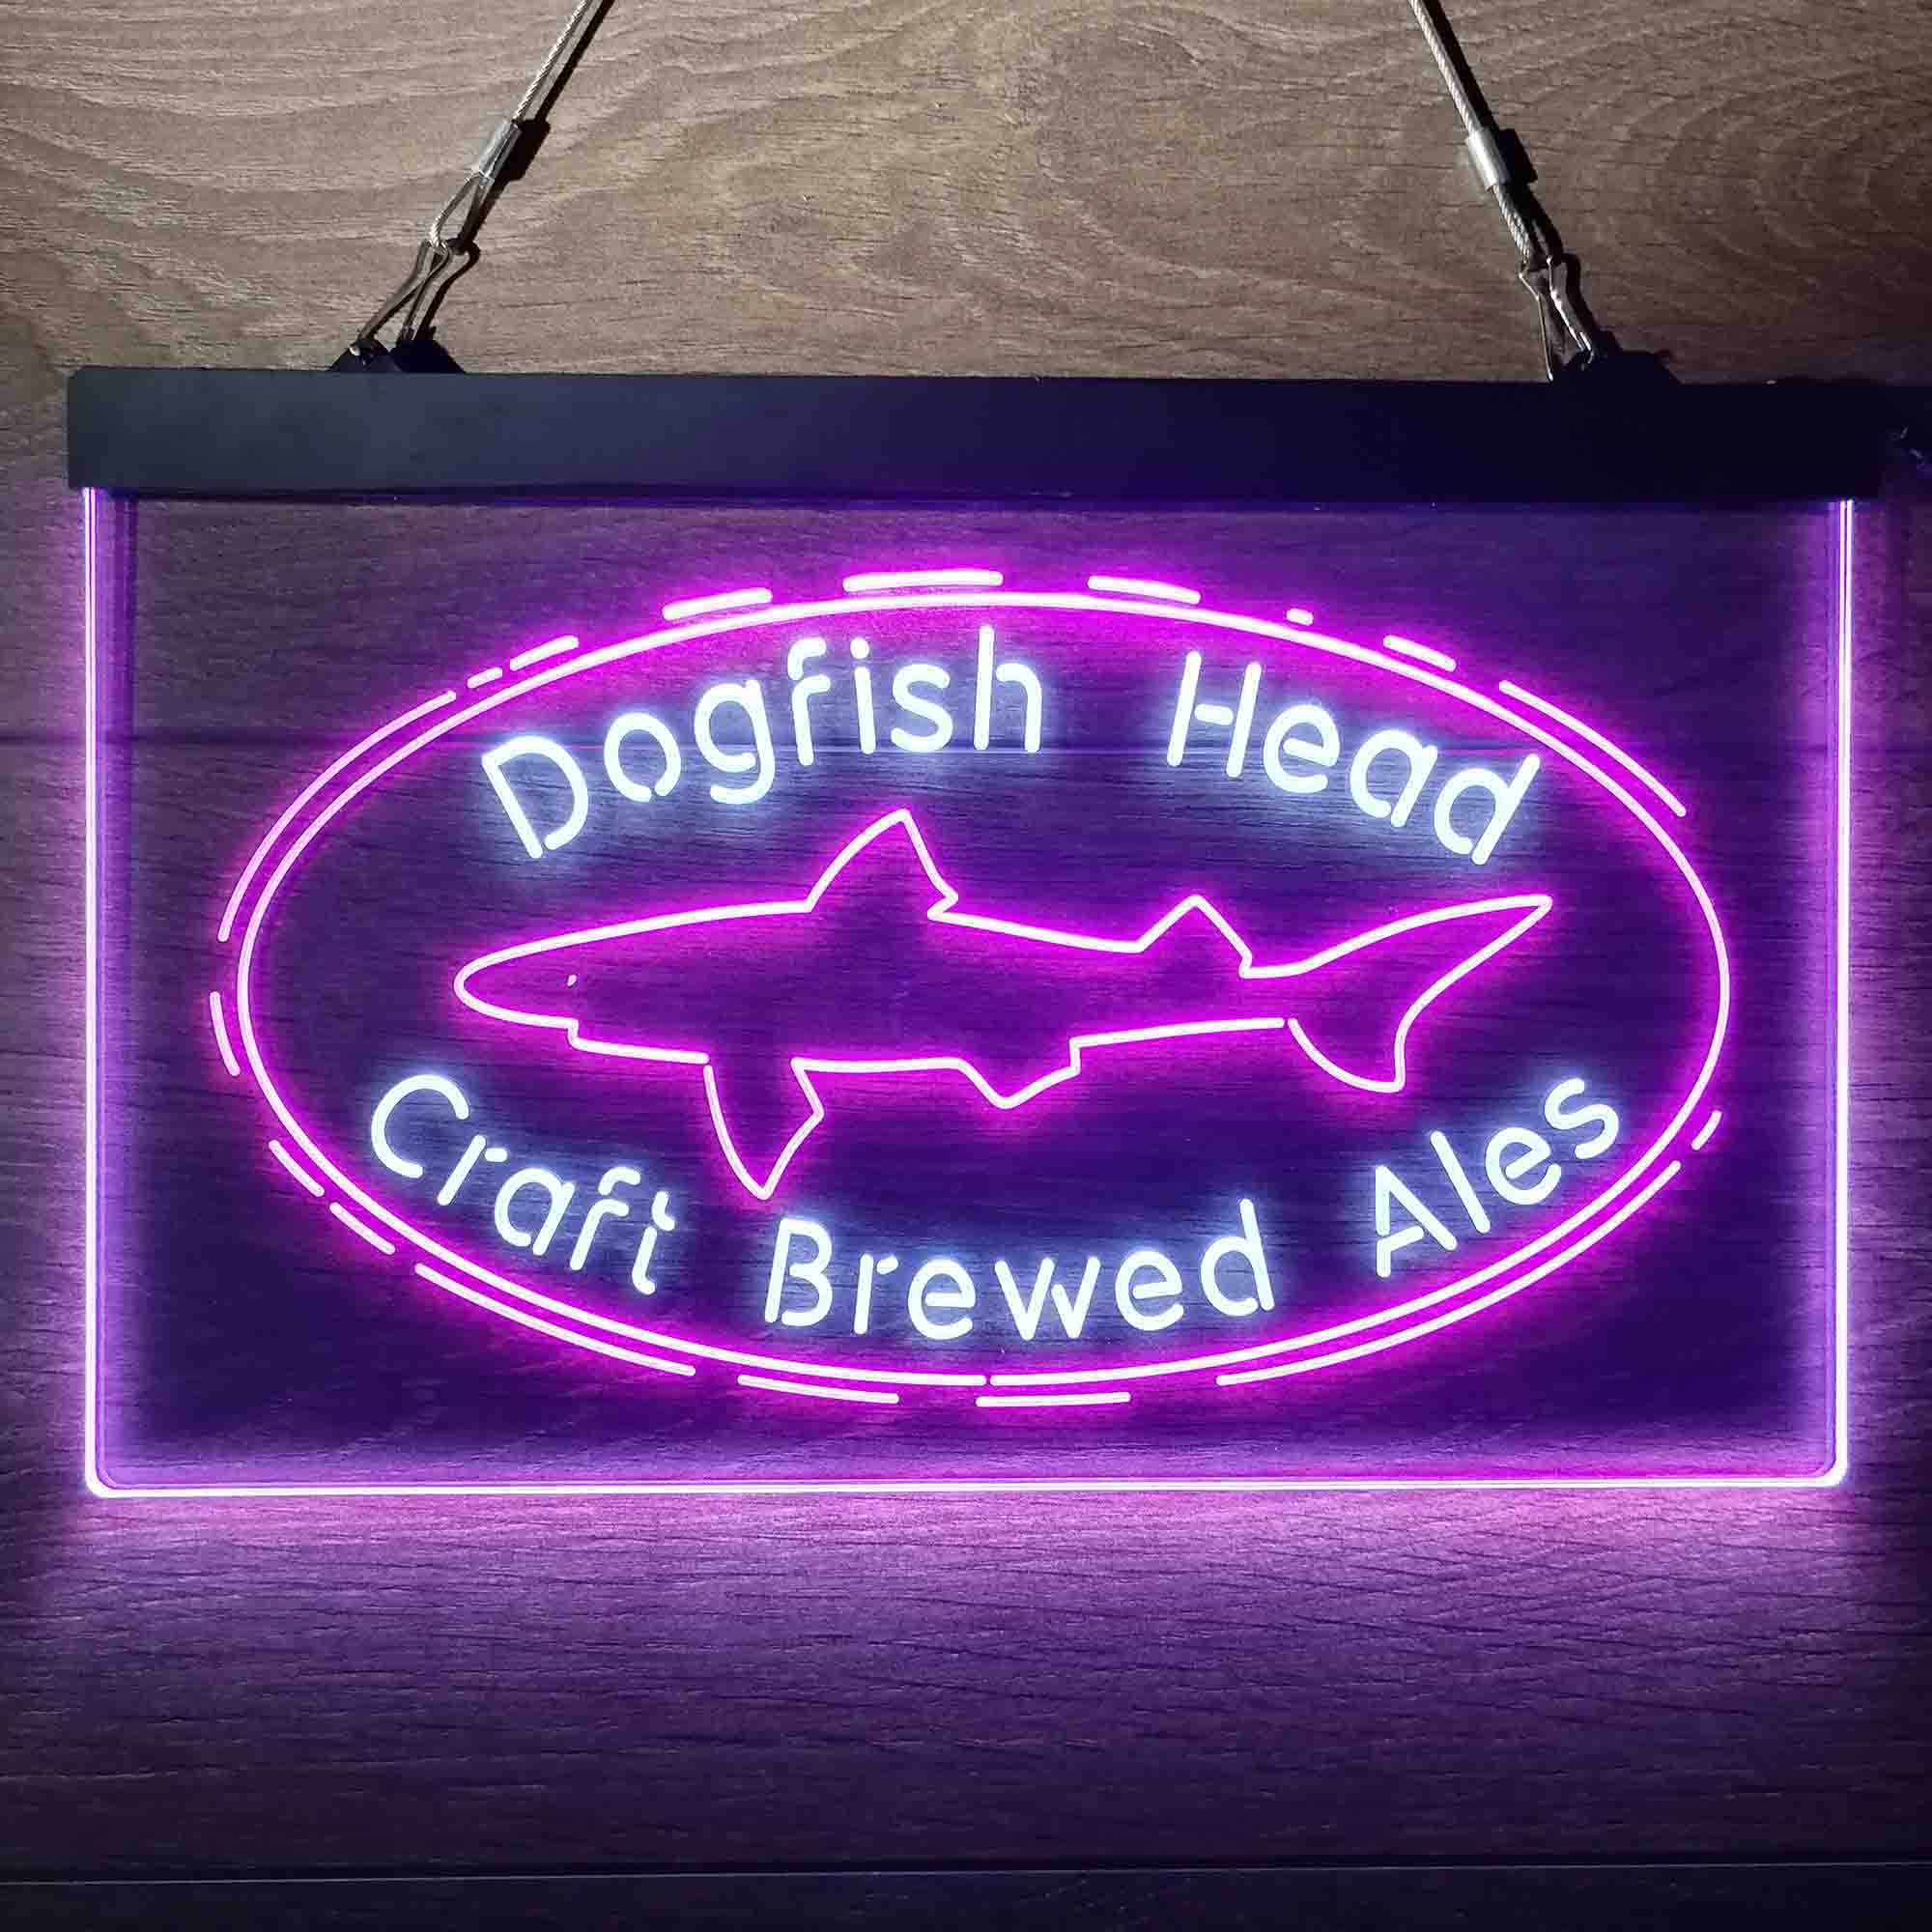 Dogfish Head Craft Brewed Ales Neon LED Sign